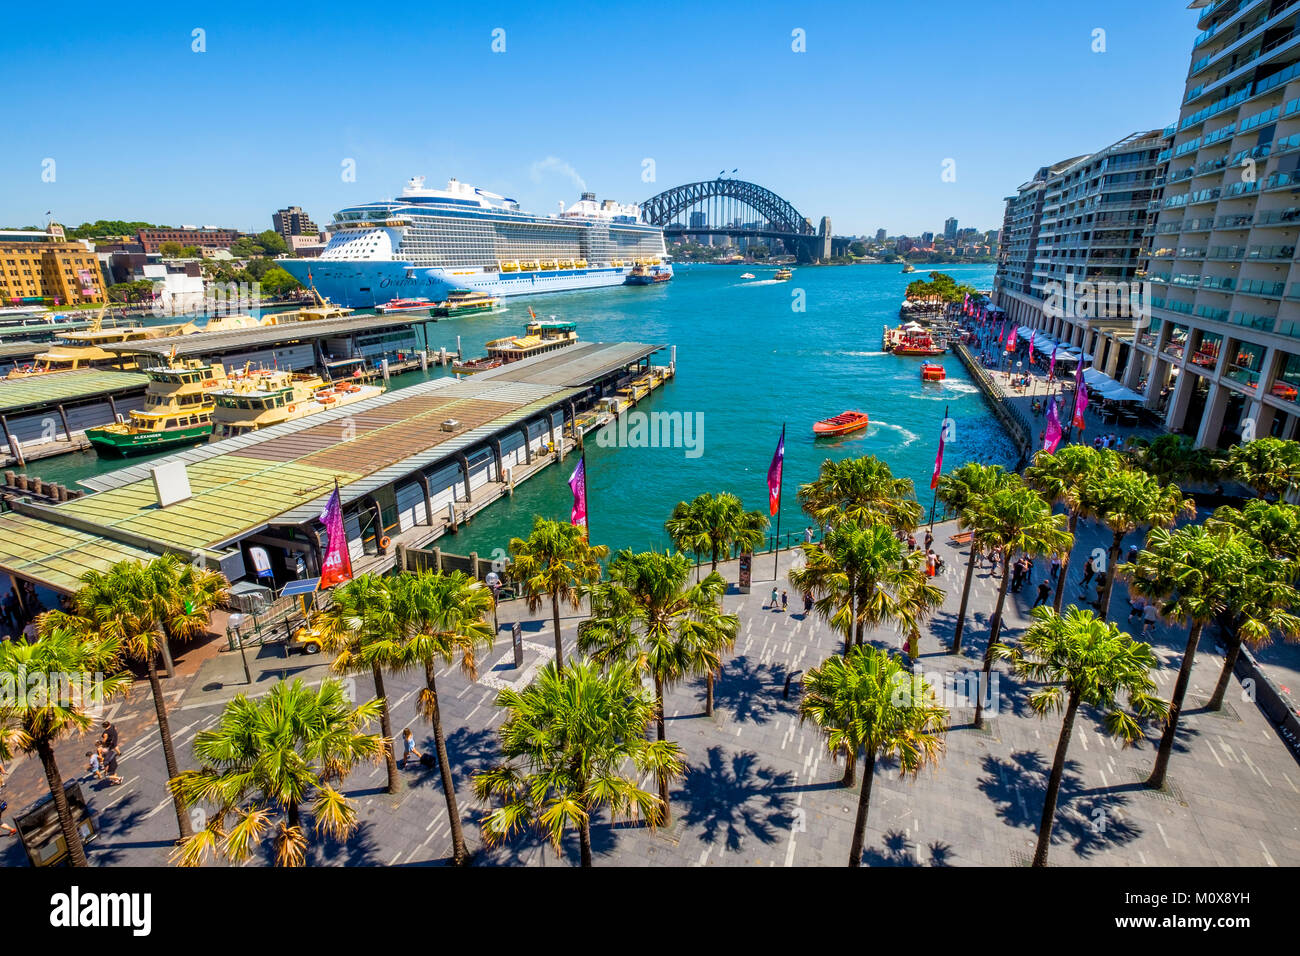 Royal Caribbean's Ovation of the Seas cruise ship moored at Overseas Passenger Terminal in Circular Quay, Sydney, Australia on a sunny day. Stock Photo